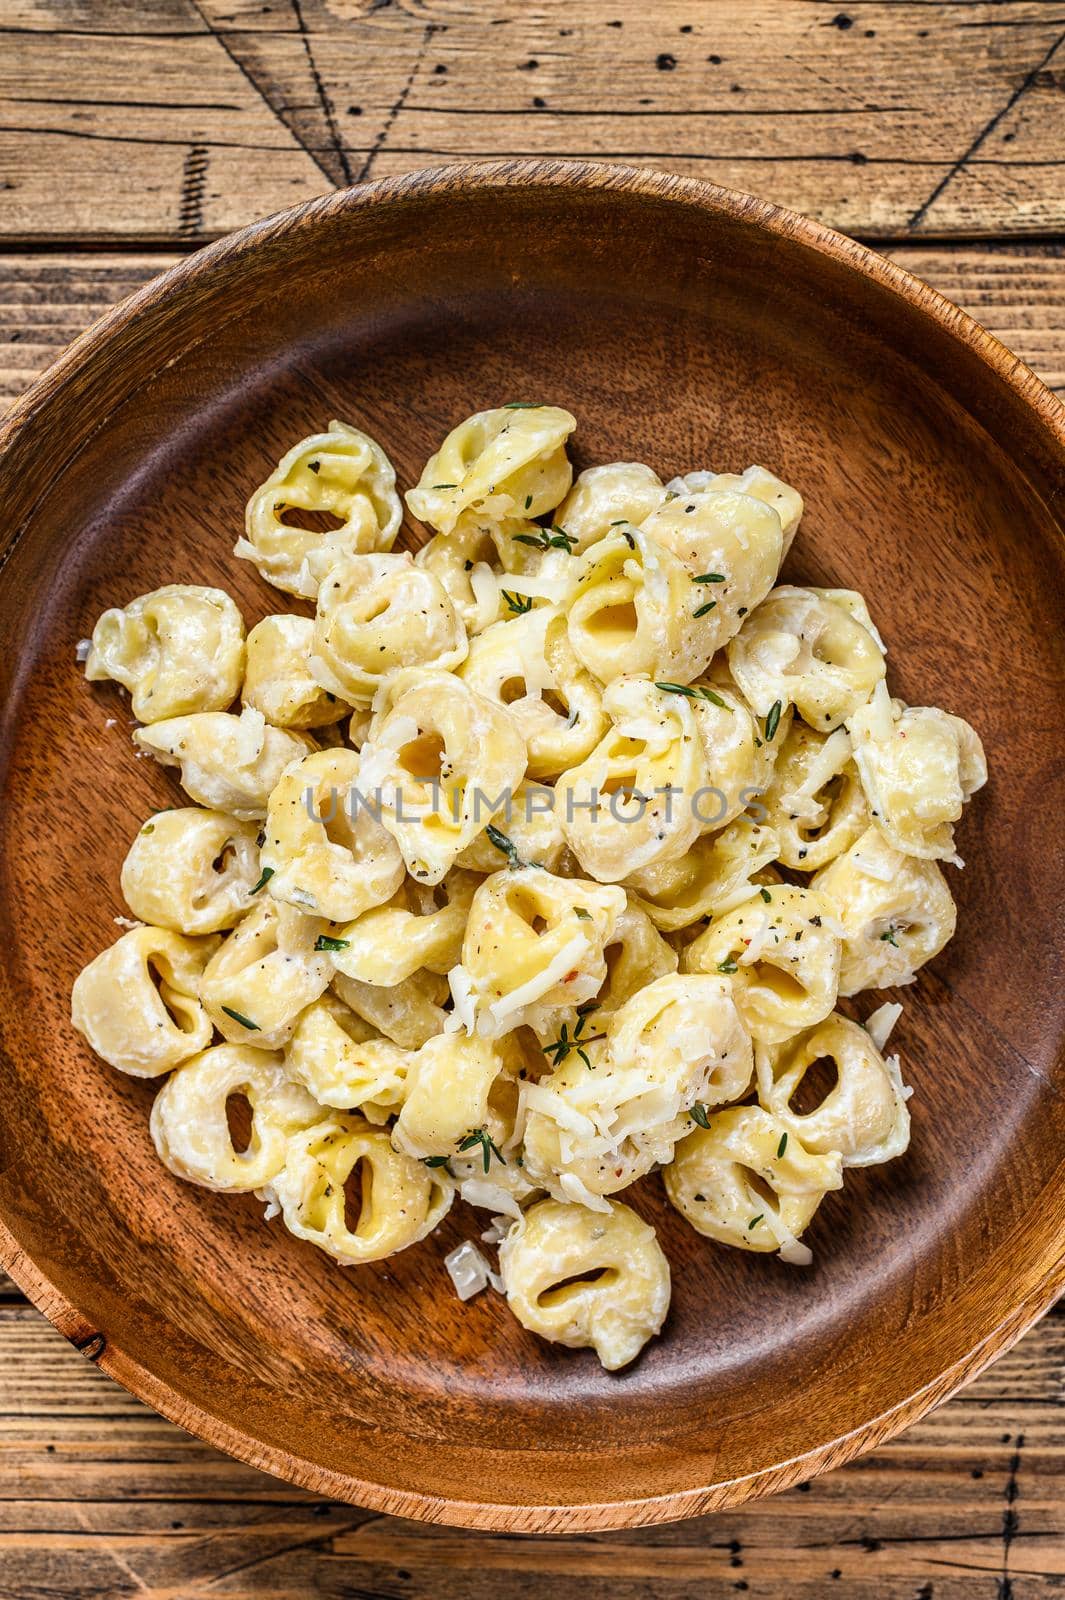 Ravioli or tortellini pasta in cream cheese sauce with meat. wooden background. Top view by Composter